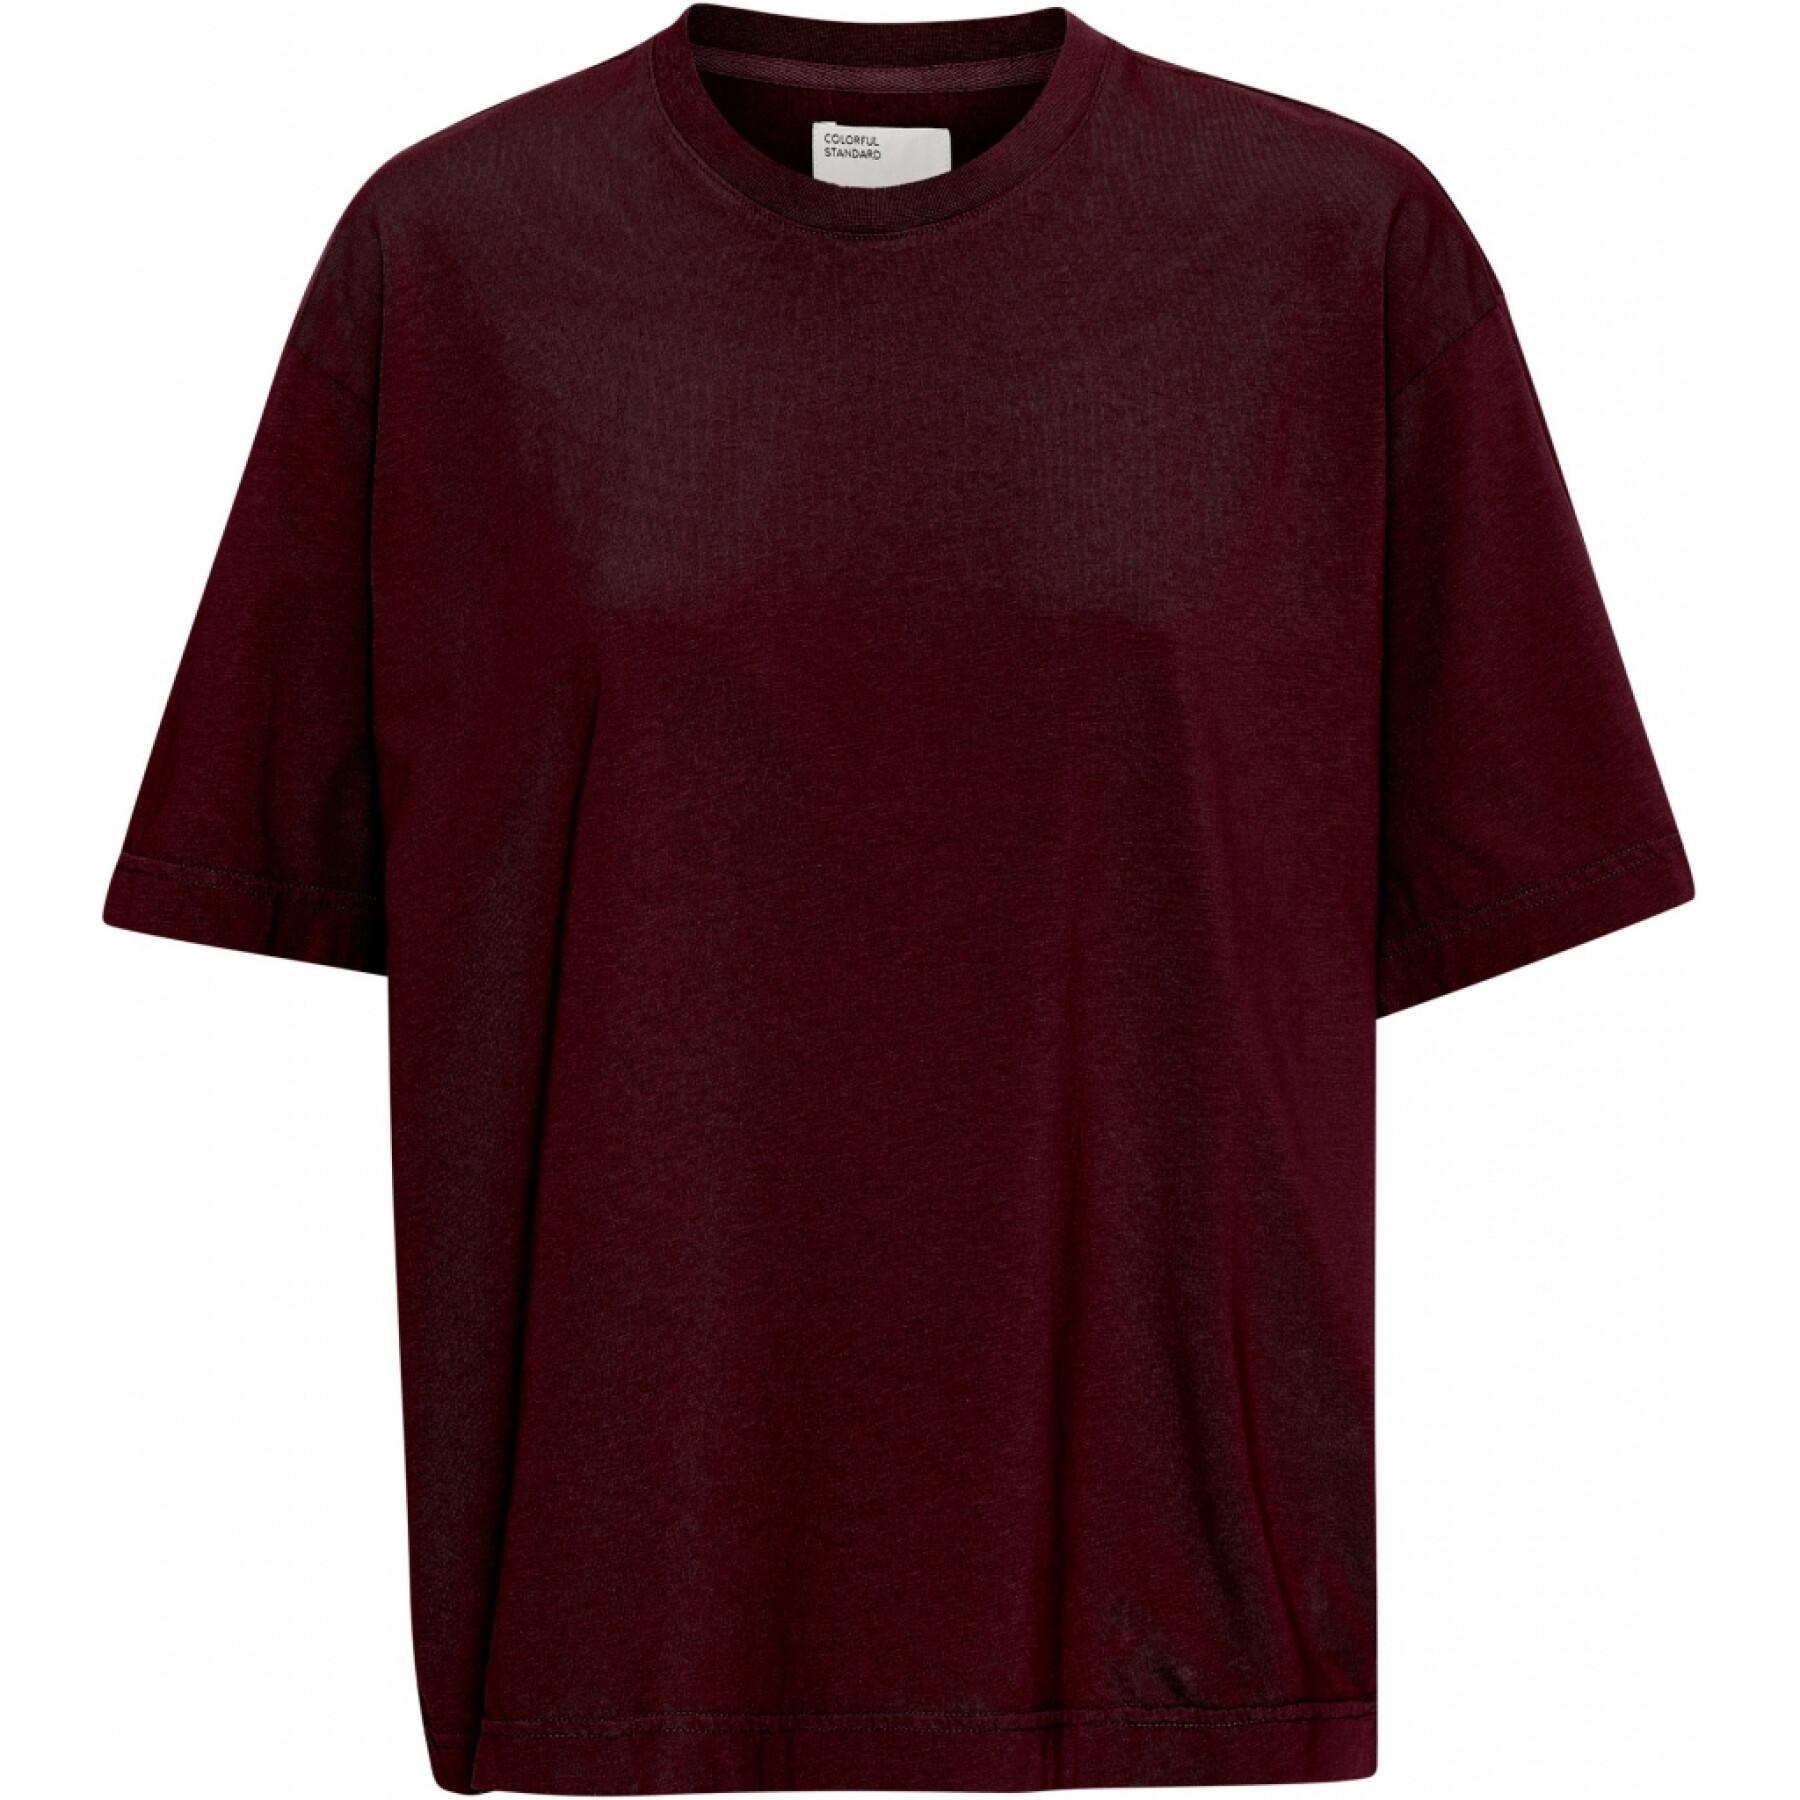 Camiseta de mujer Colorful Standard Organic oversized oxblood red